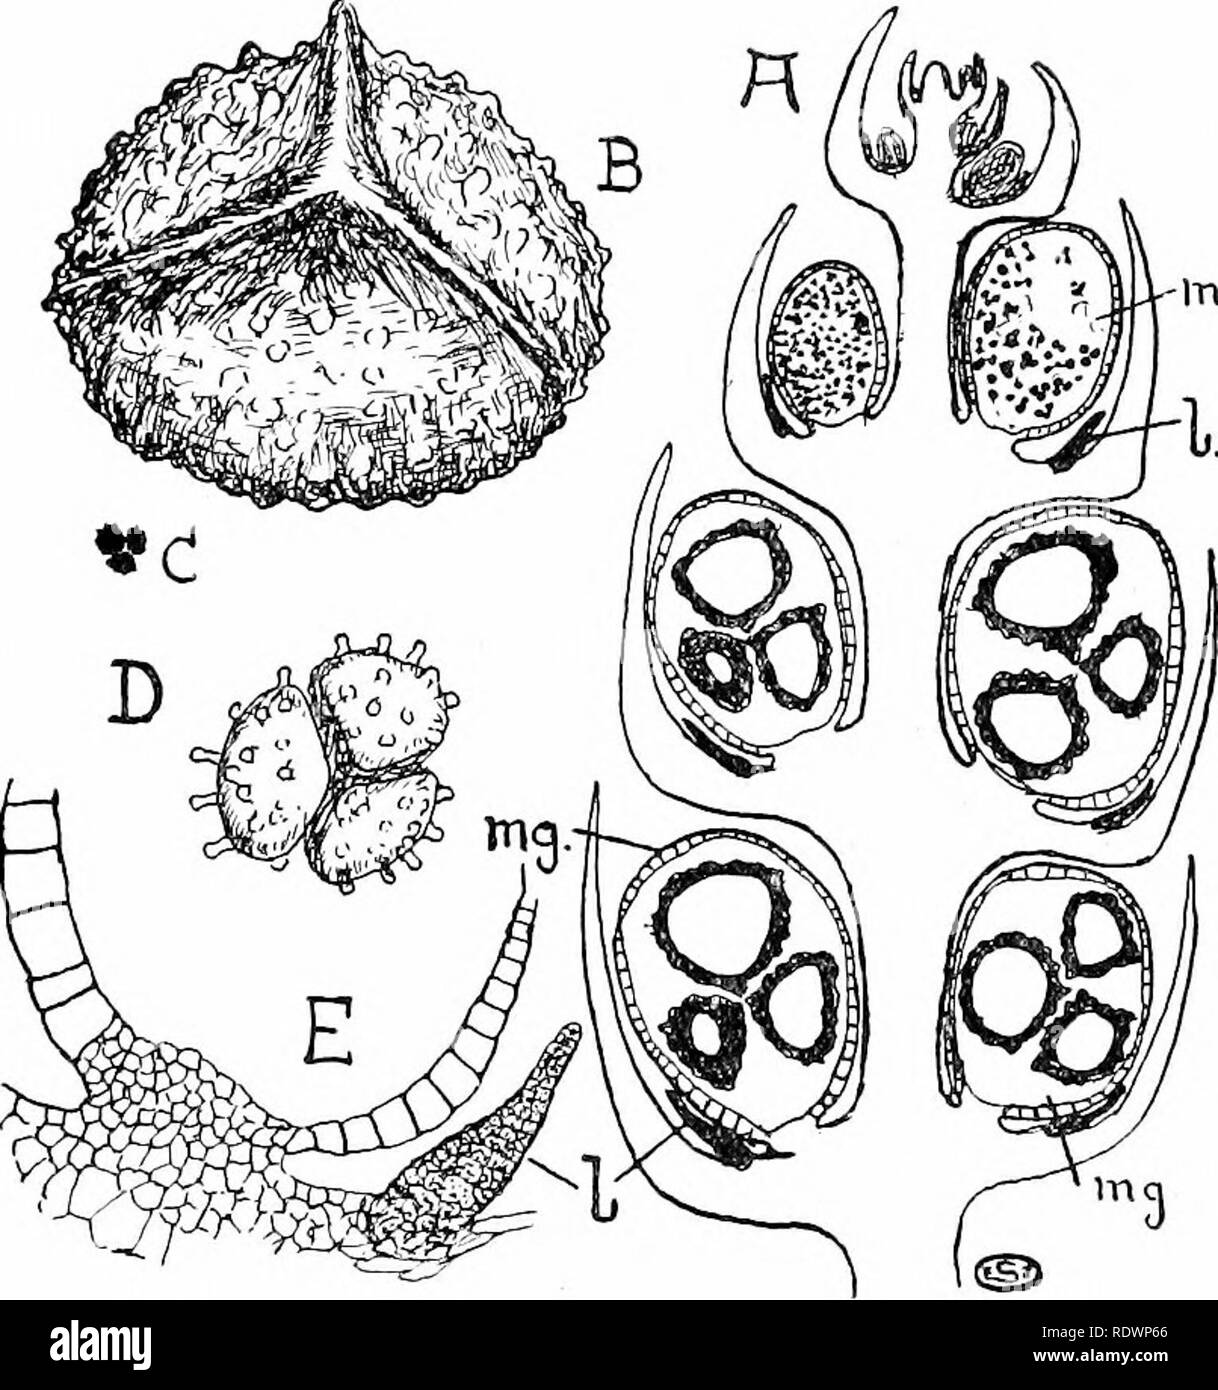 . An introduction to the structure and reproduction of plants. Plant anatomy; Plants. 3ib SPORES OF SELAGINELLA These features are readily observed in longitudinal sections through the cones, which also show the presence of a small outgrowth (the ligule, Fig. i8i, /.) from the upper surface of each sporophyll, between its upturned tip and the sporangium. Such ligules, though most conspicuous on the sporophylls, oc- cur also on all the vegetative 1 e a ^f e s , but their function is altogether obscure. A ligule is not met with in the genus Lycopo- diiiin, but ap- pears to ha'e been character-  Stock Photo